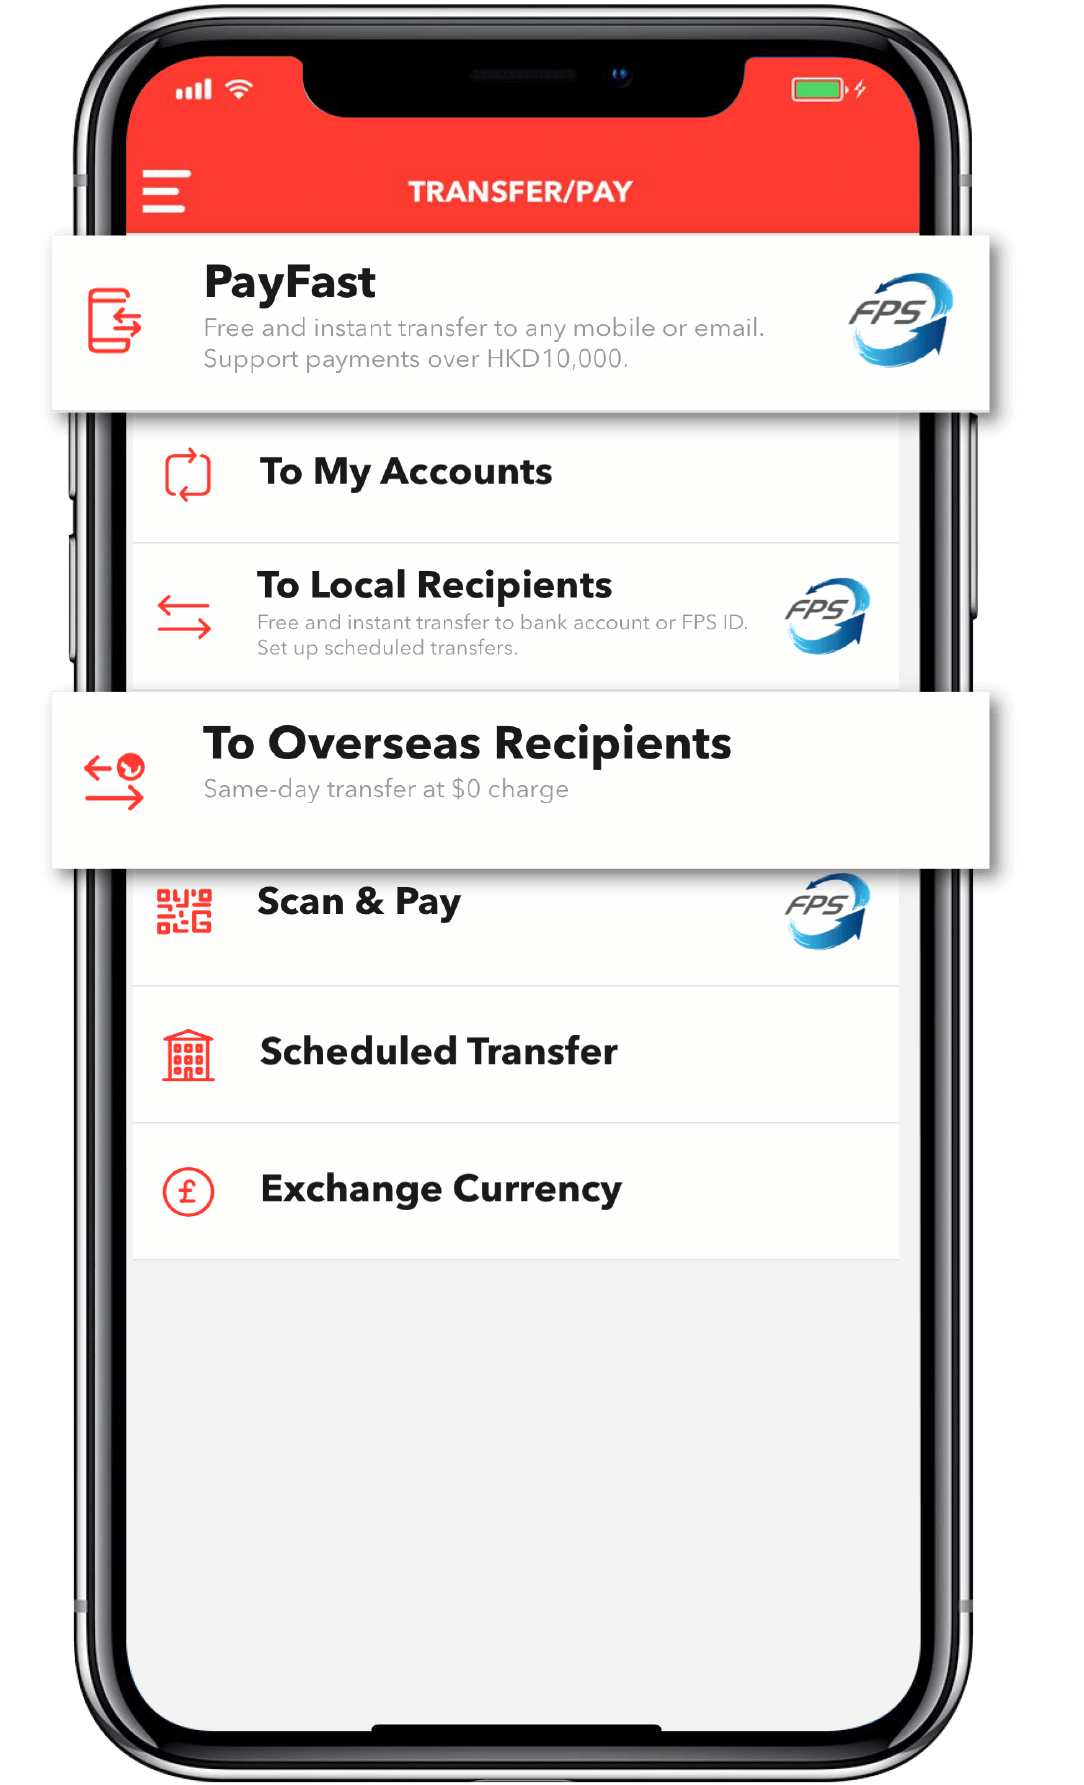 Choose transfer by PayFast to your local families and friends, or tap “To Overseas Recipients” to those living abroad